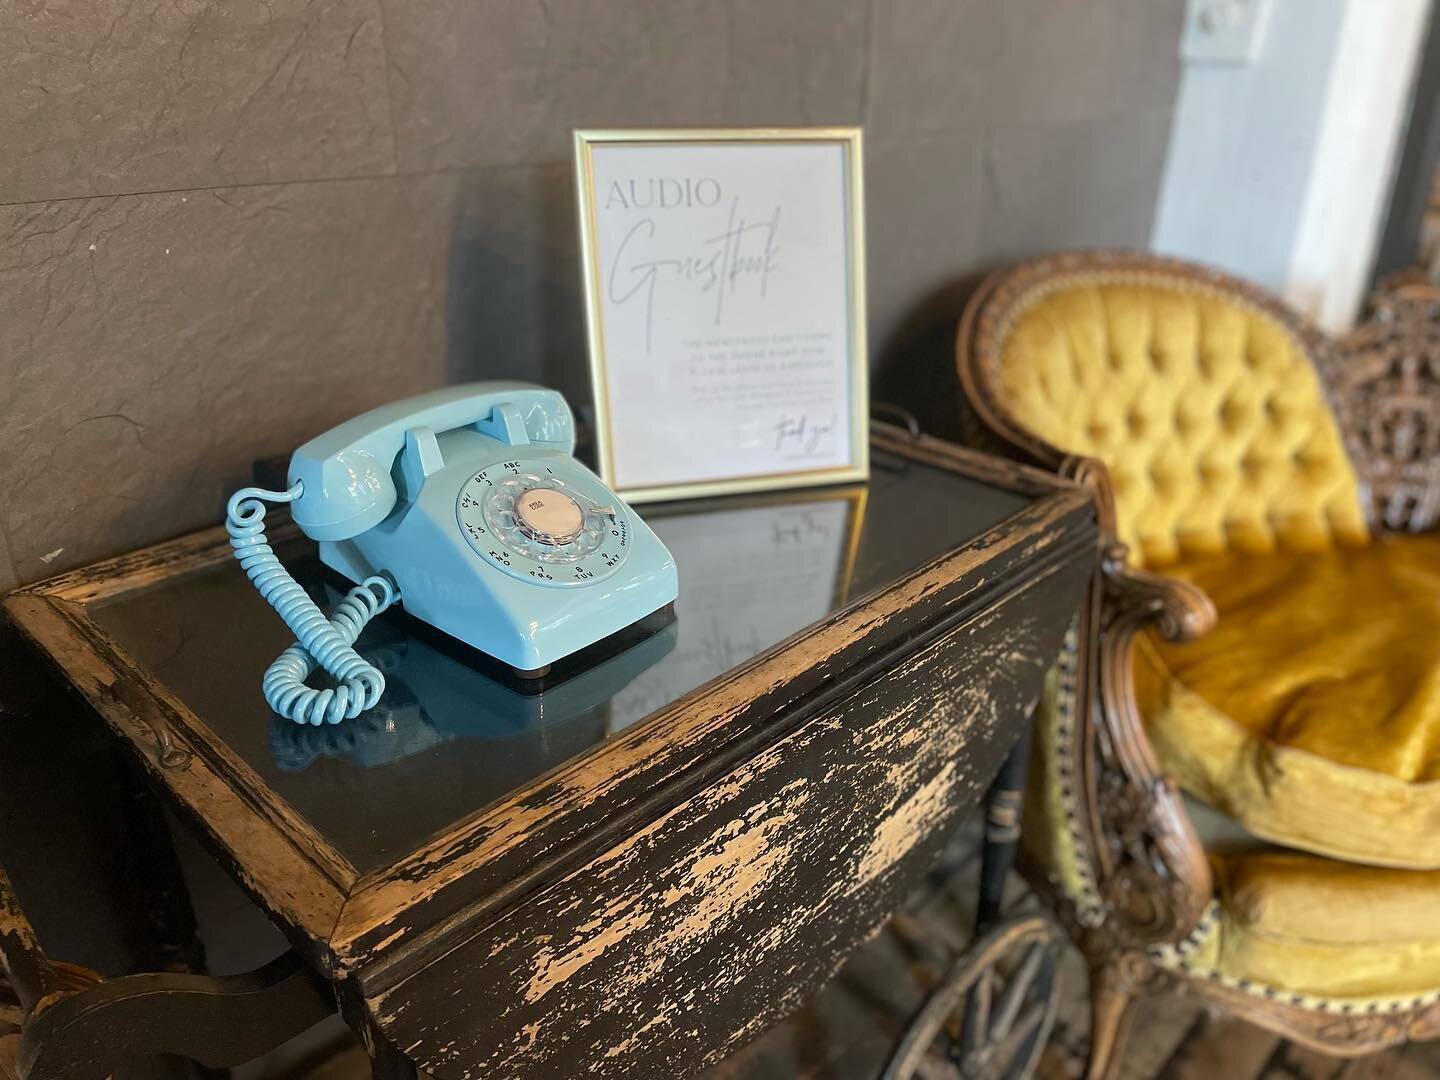 First a typewriter, than a rotary phone! These vintage #guestbook ideas are even better next to our vintage furniture. #vintageguestbook #leaveamessage #weddingguestbook